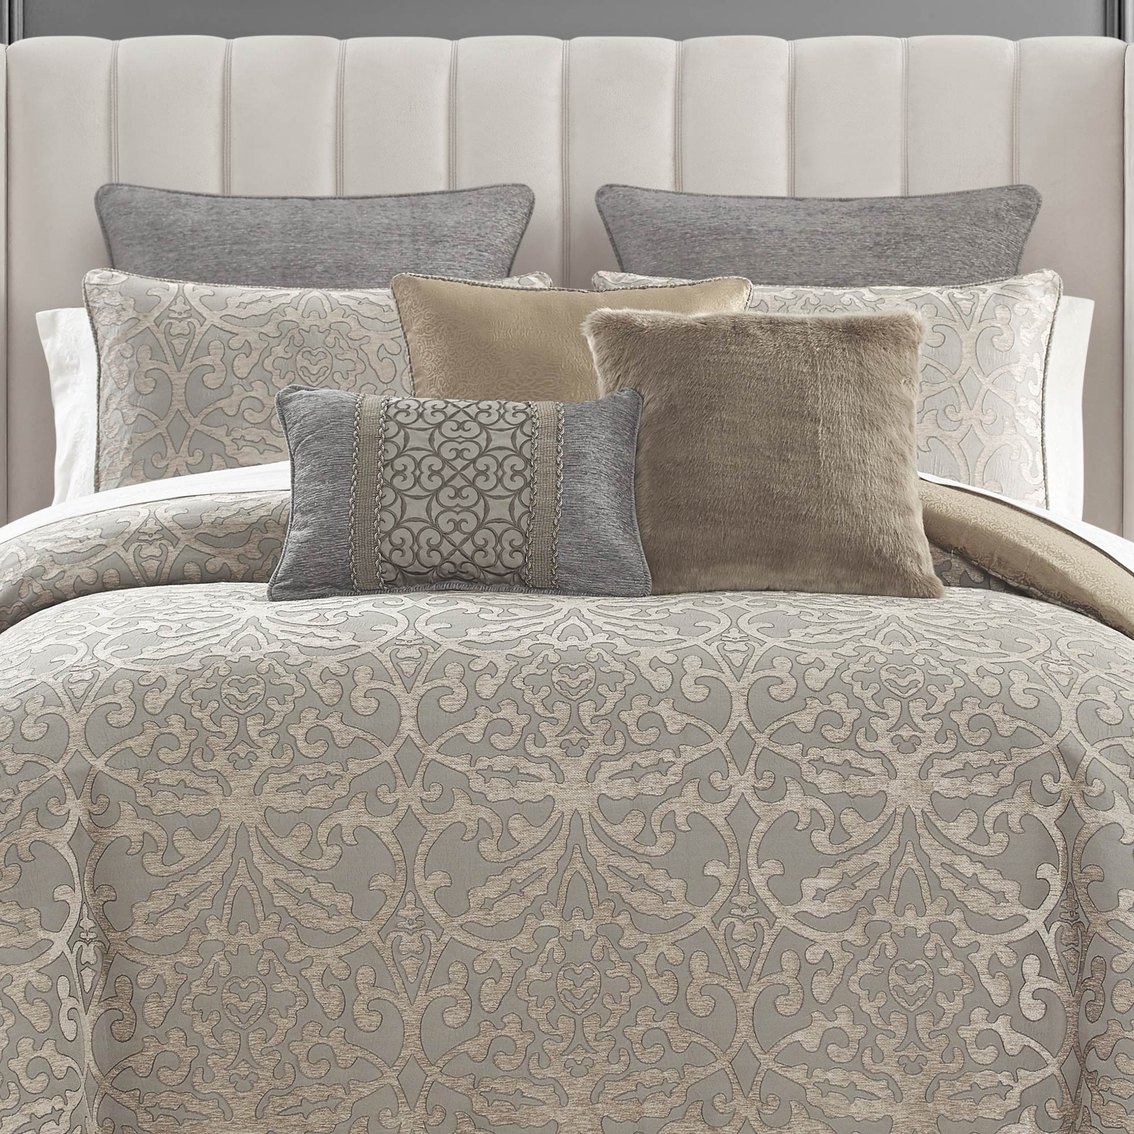 Waterford Carrick 6 pc. Comforter Set - Image 8 of 9